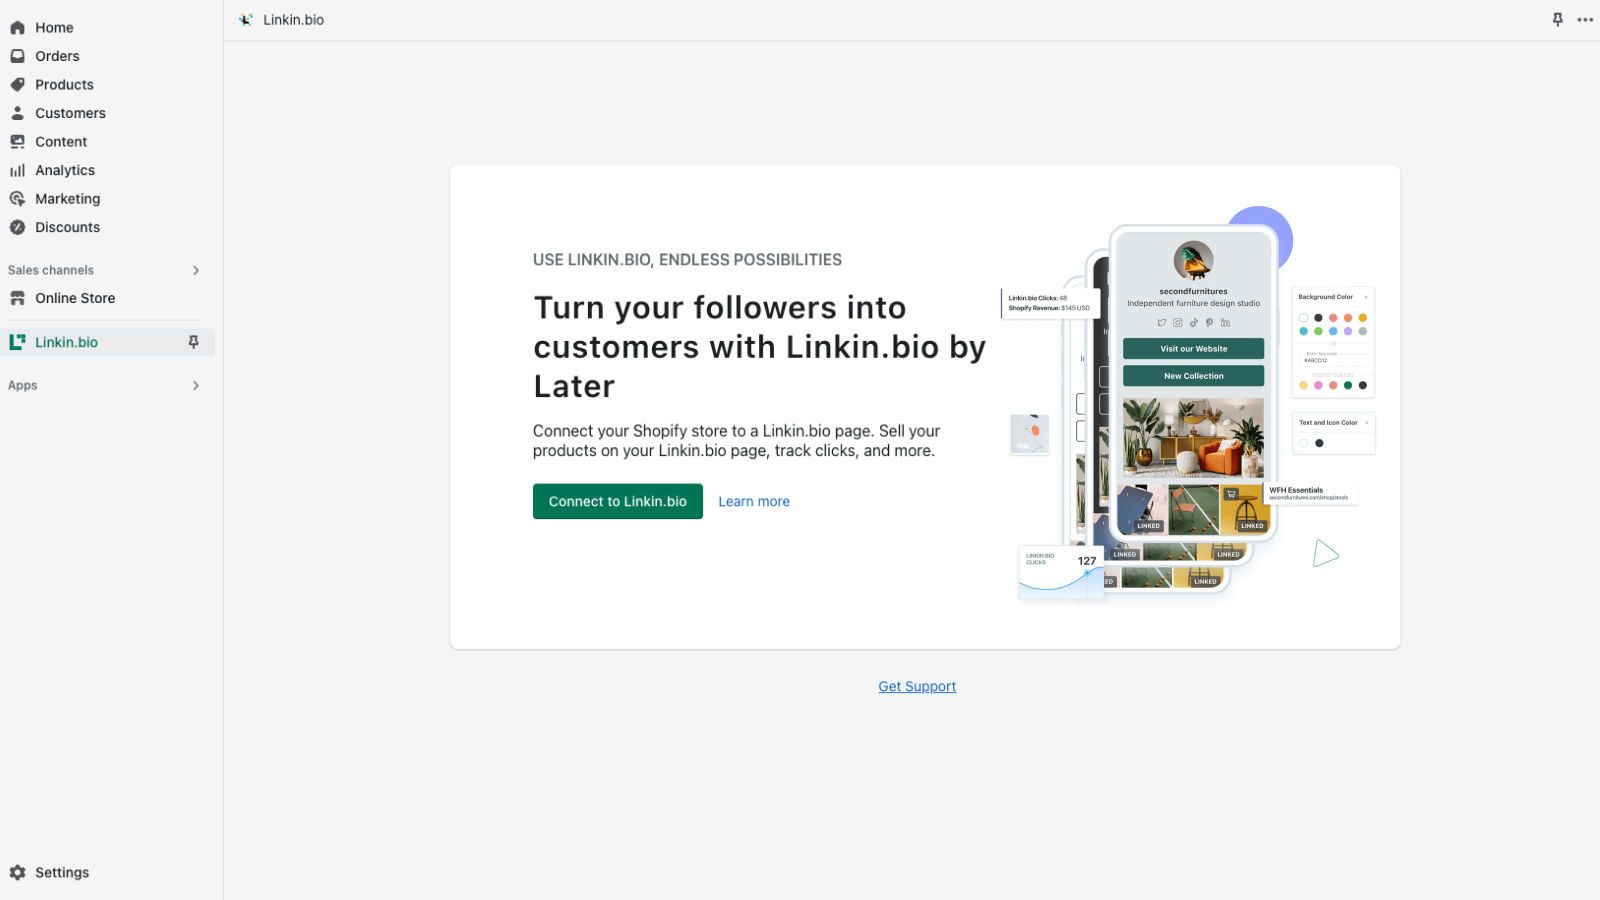 Turn your followers into customers with Linkin.bio by Later.